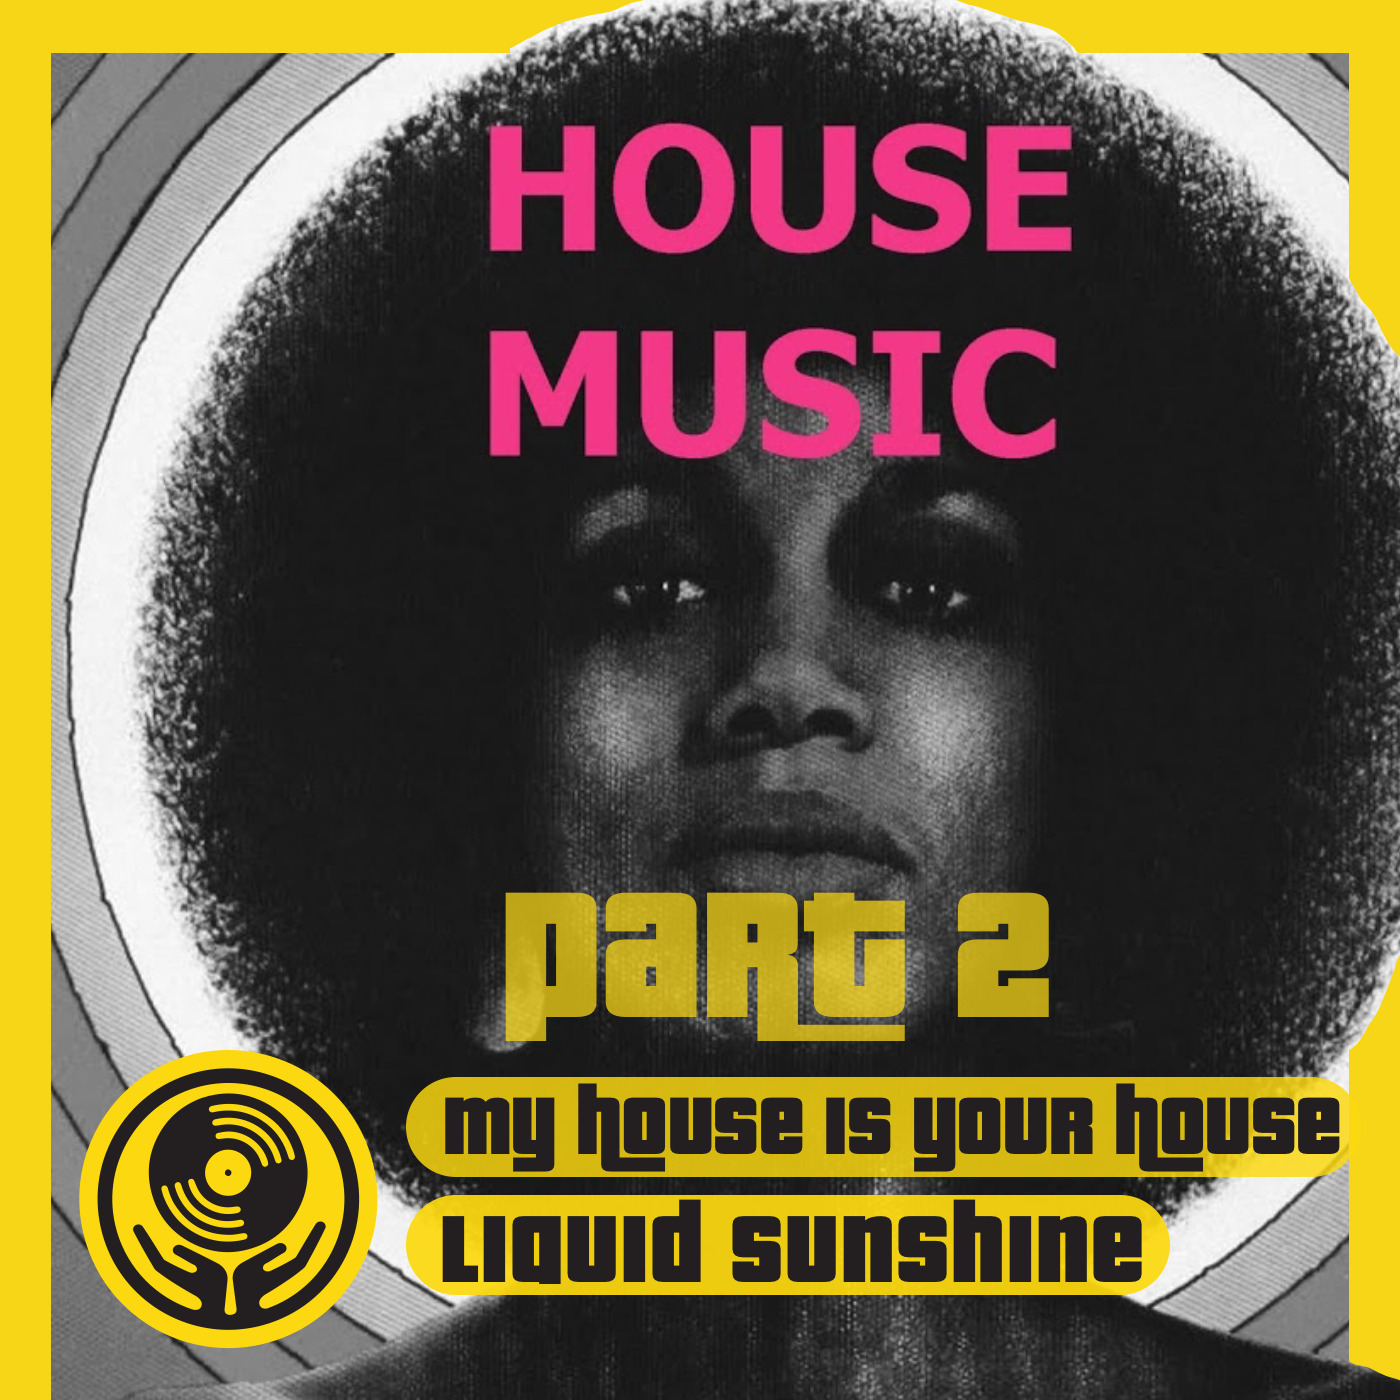 My House is Your House - Sunset to Sunrise House Trip - Part 2 of 4 - Liquid Sunshine @ The Face Radio - 21-06-2022